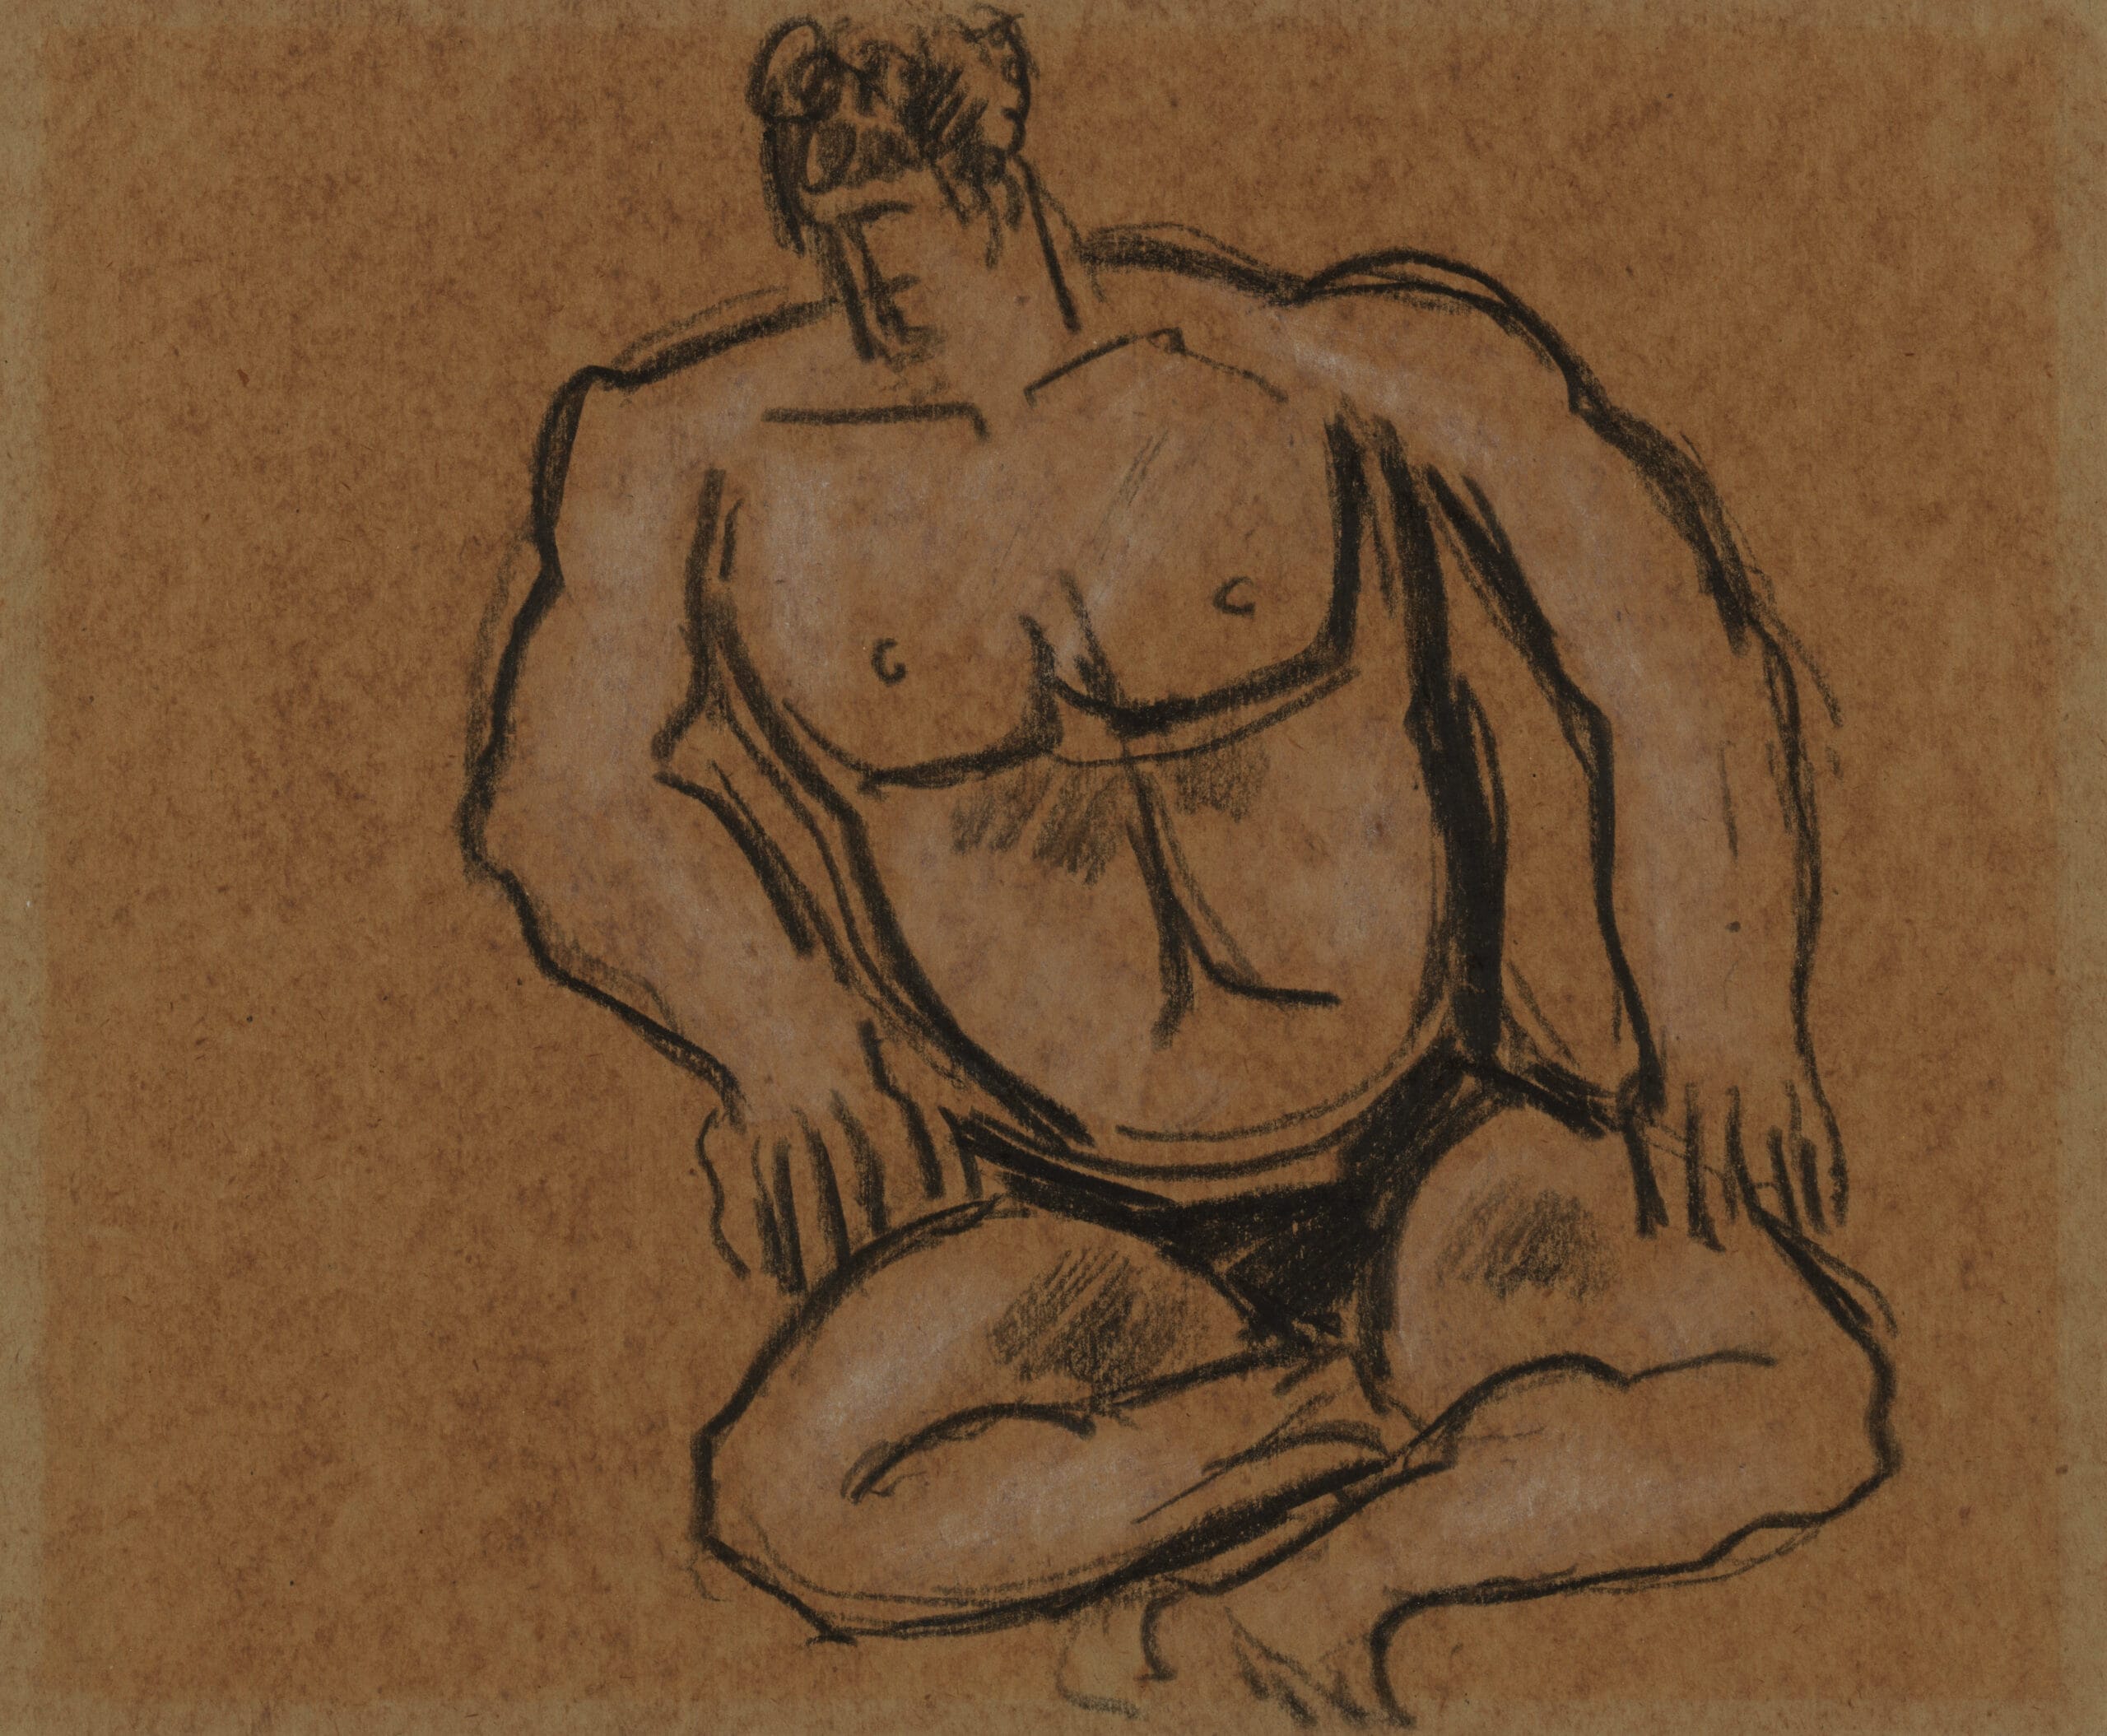 A charcoal drawing of a seated half-nude man with his legs crossed and his face obscured.